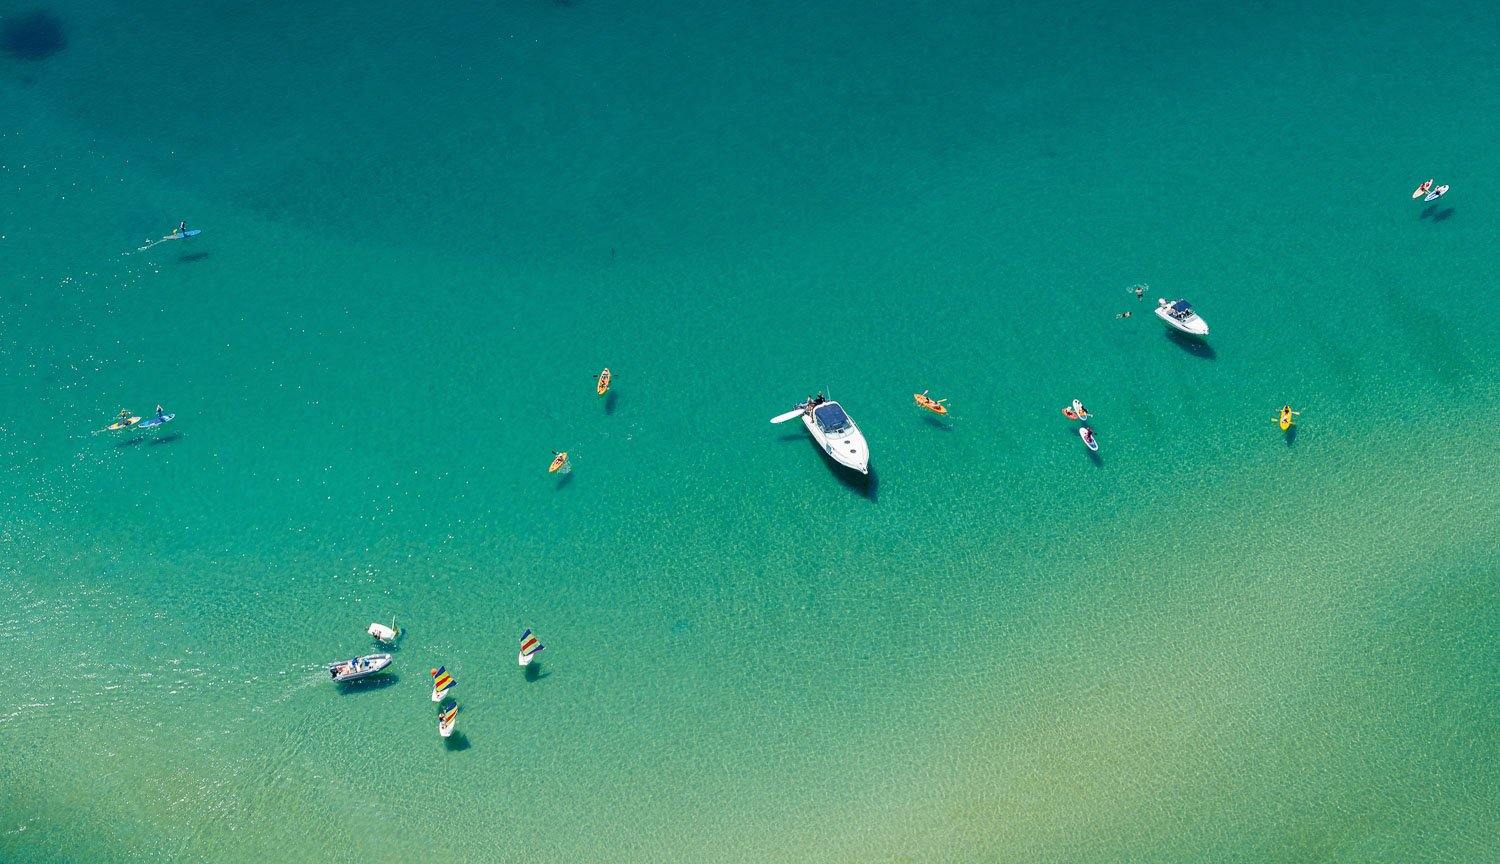 Aerial view of the green ocean with some boats floating over, Turquoise Shadows - Mornington Peninsula VIC Printed